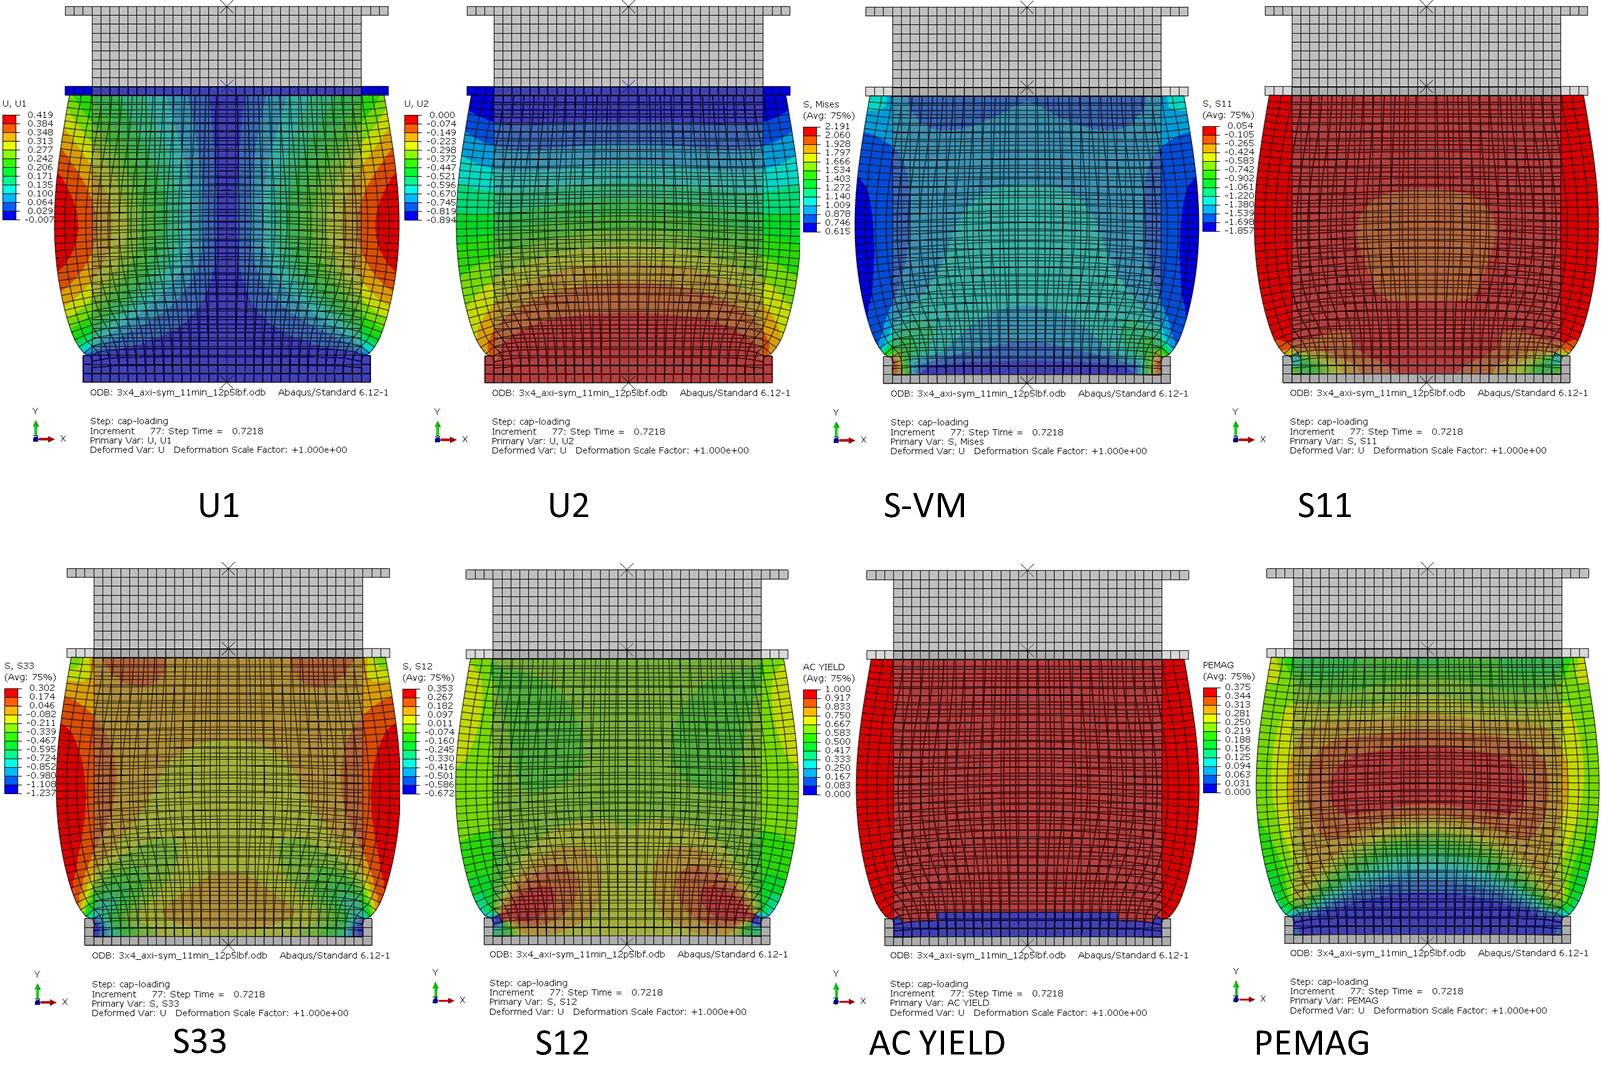 Numerical simulations of fresh mortar specimens loaded in axial compression at specific mortar maturities. The finite element analyses use the linear Drucker-Prager elasto-plastic model (Step-Time=0.72)